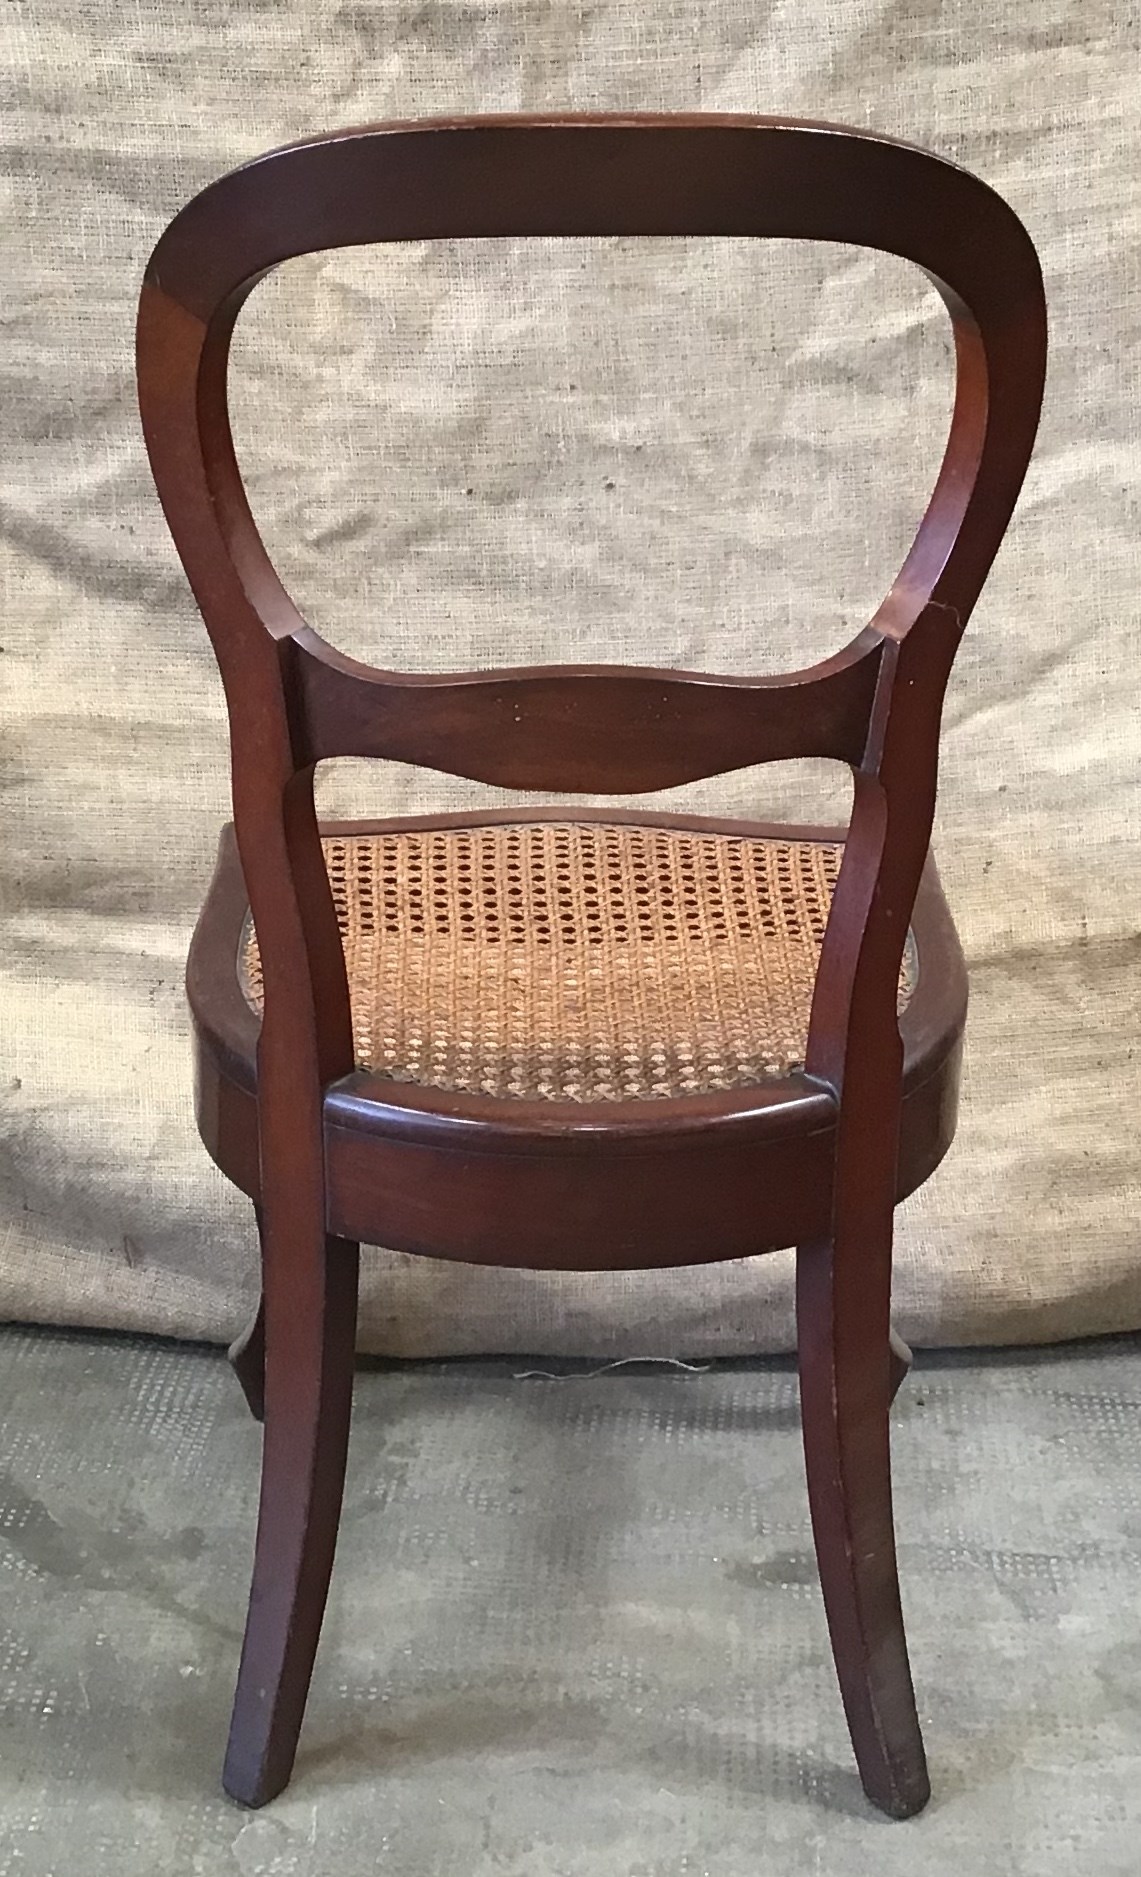 SE12078 - Set of 8 wooden chairs with Vienna straw seats - Brocante - Riccardo  Barthel